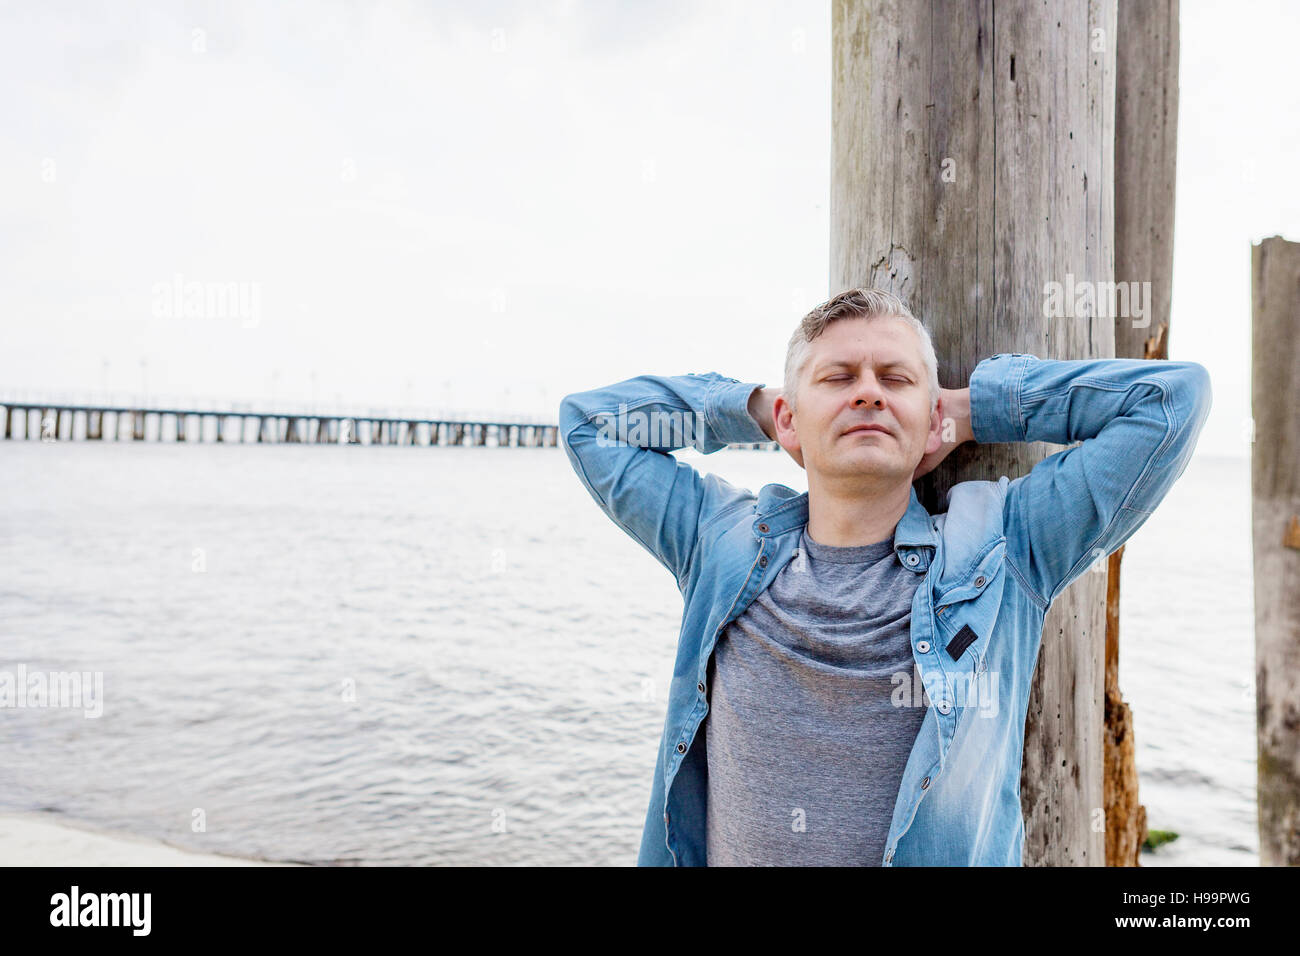 Portrait of man with gray hair on beach relaxing Stock Photo